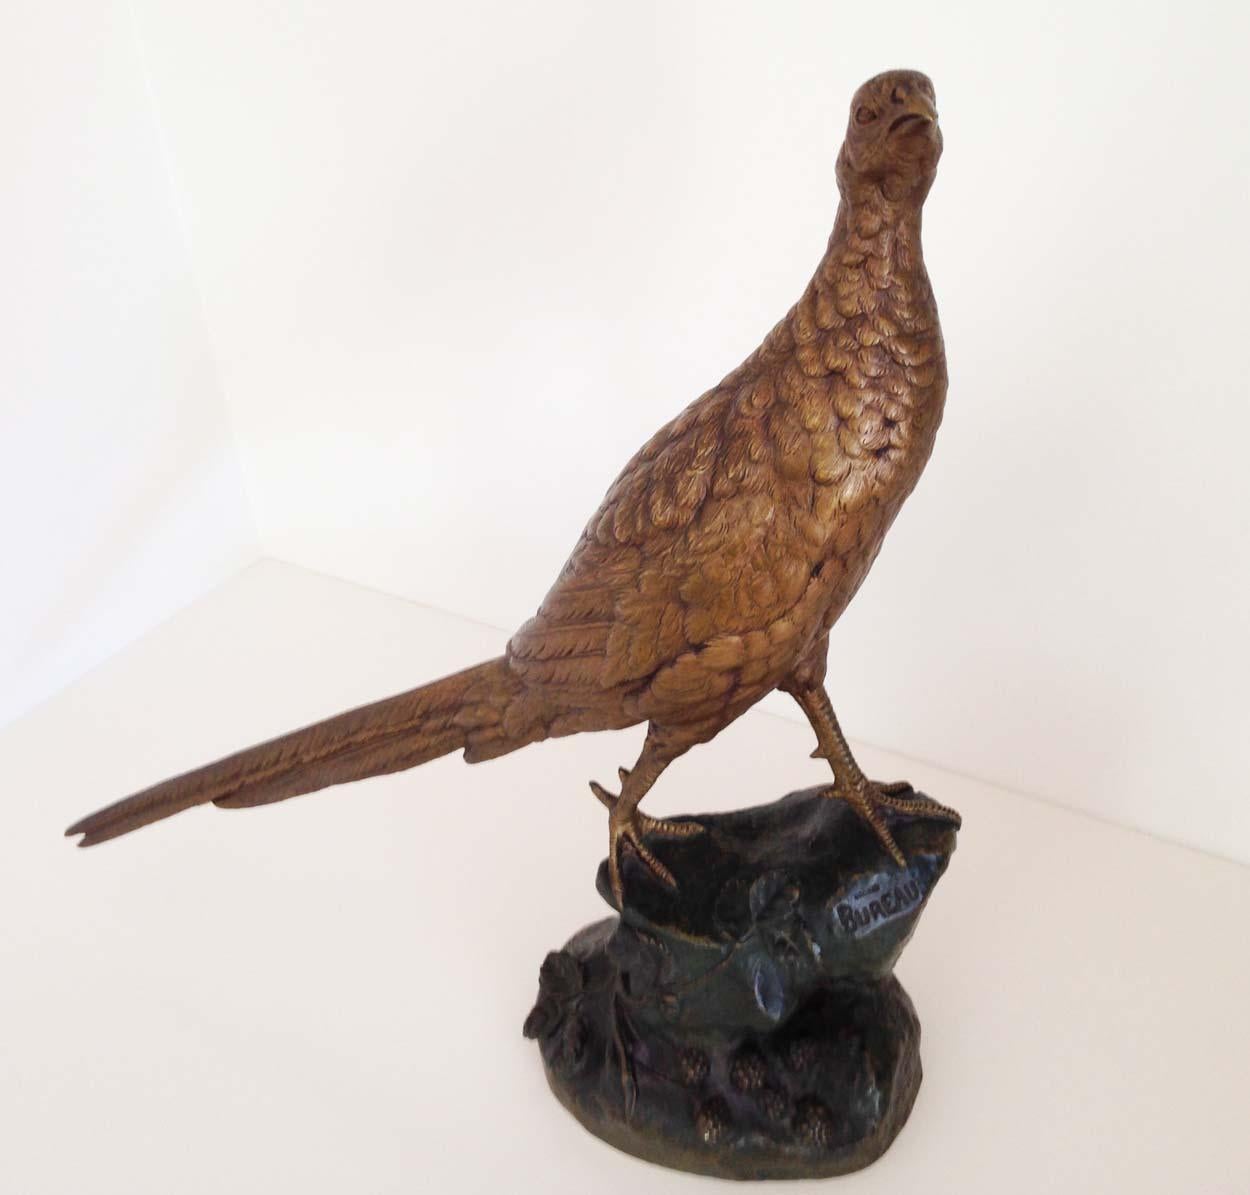 Leon Bureau (1866-1906)

French sculptor well-known for animal genre.

This bronze pheasant is an old casting circa 1900 produced using the lost wax process.

In present is very good condition with two coloured patina of brown and gold with